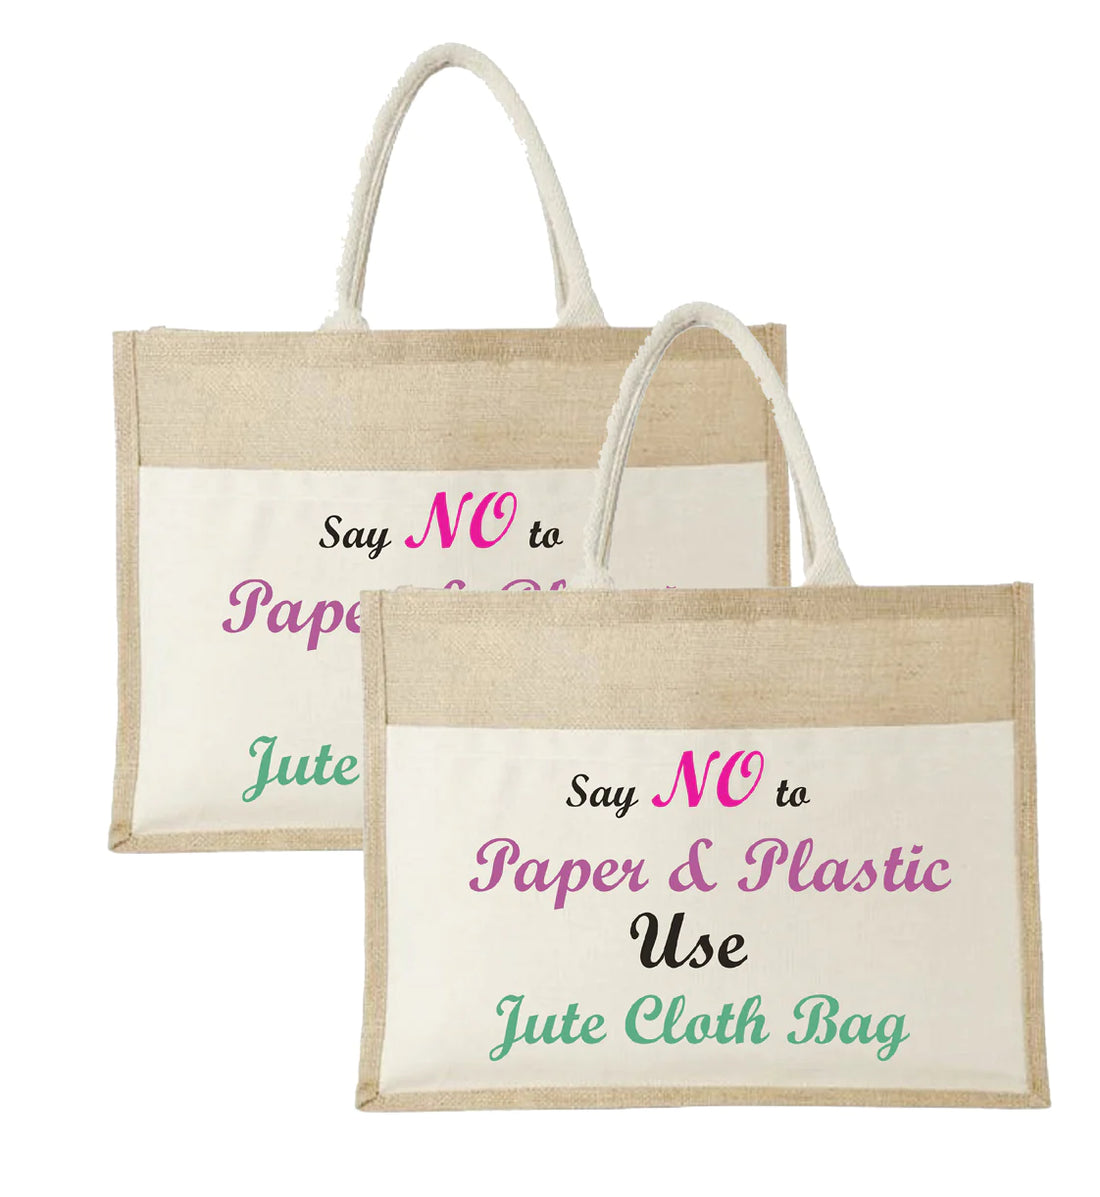 Beyond the Box: Creative Ways to Use Jute Bags for Your Wedding